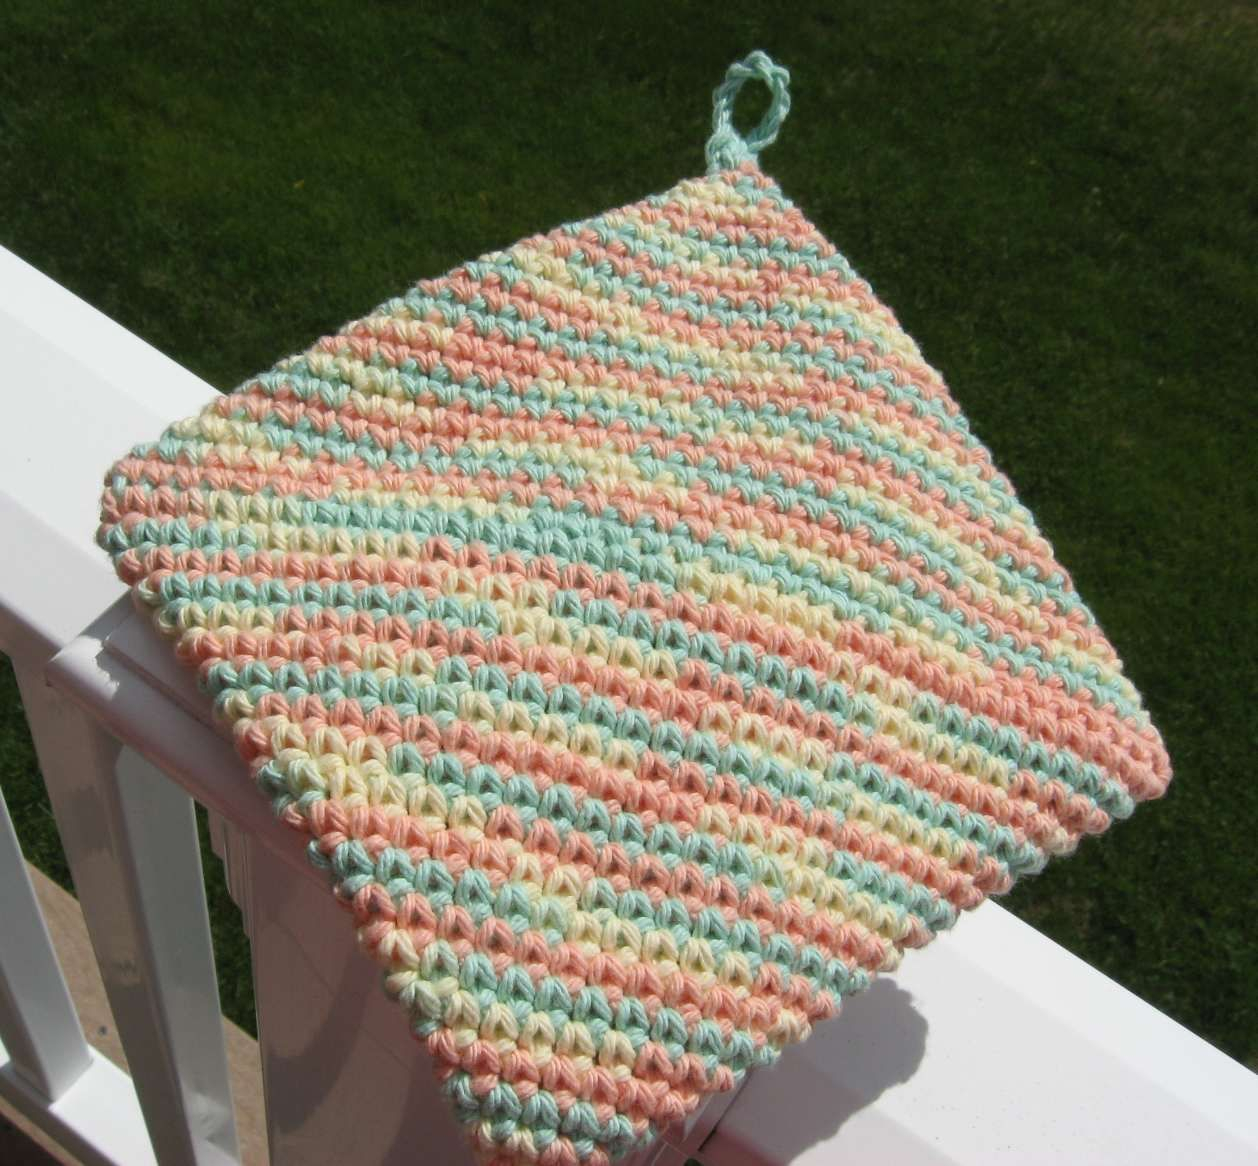 Double Thick Diagonal Crochet Potholder Pattern This Morning I Learned How To Crochet A Diagonal Double Thick Hot